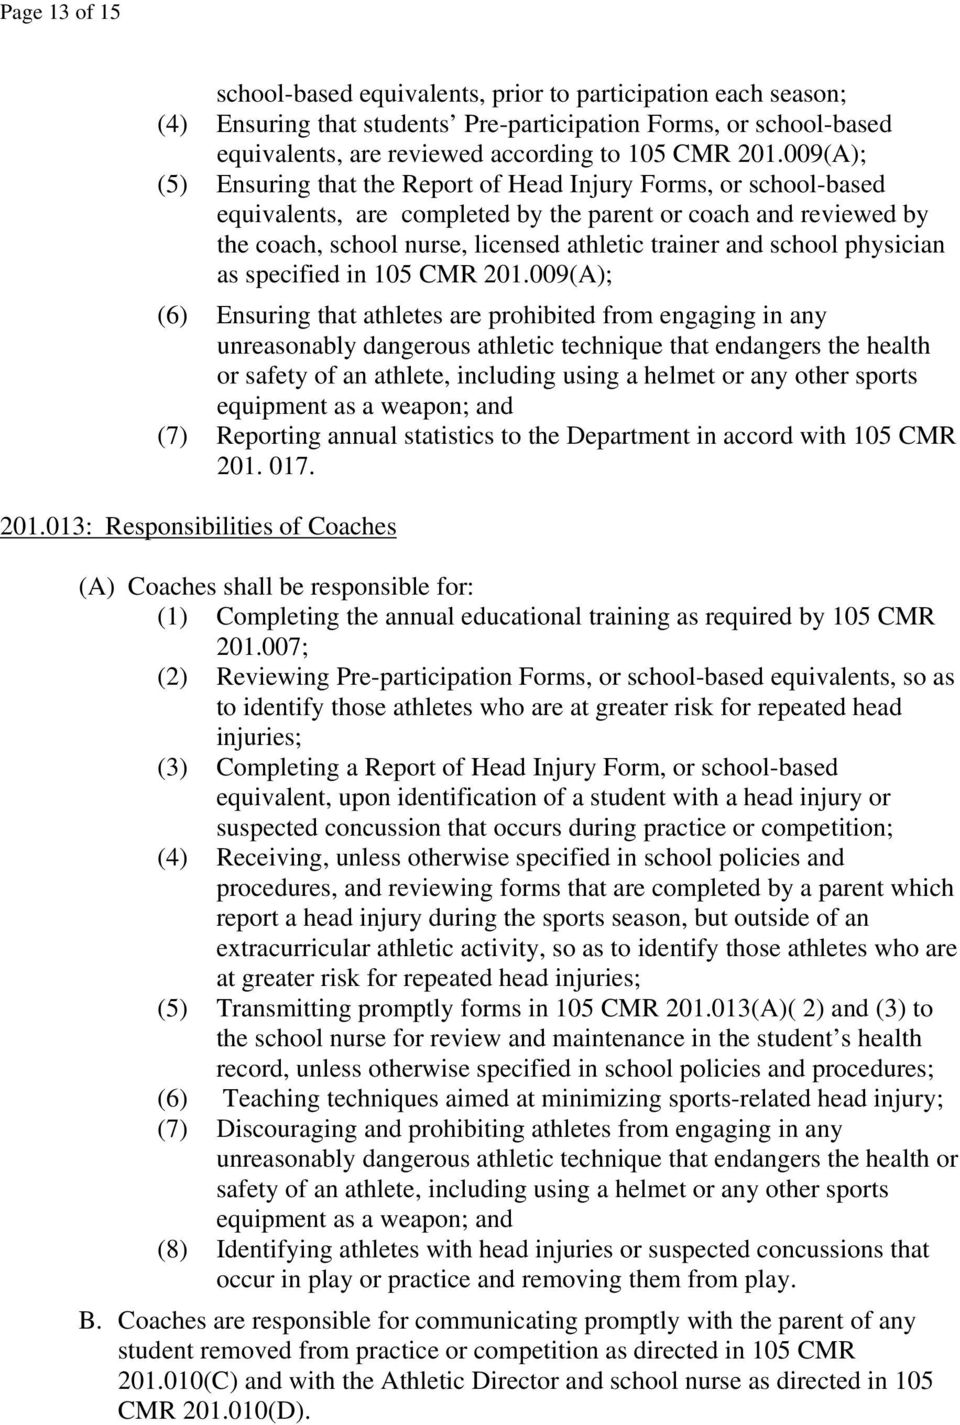 school physician as specified in 105 CMR 201.